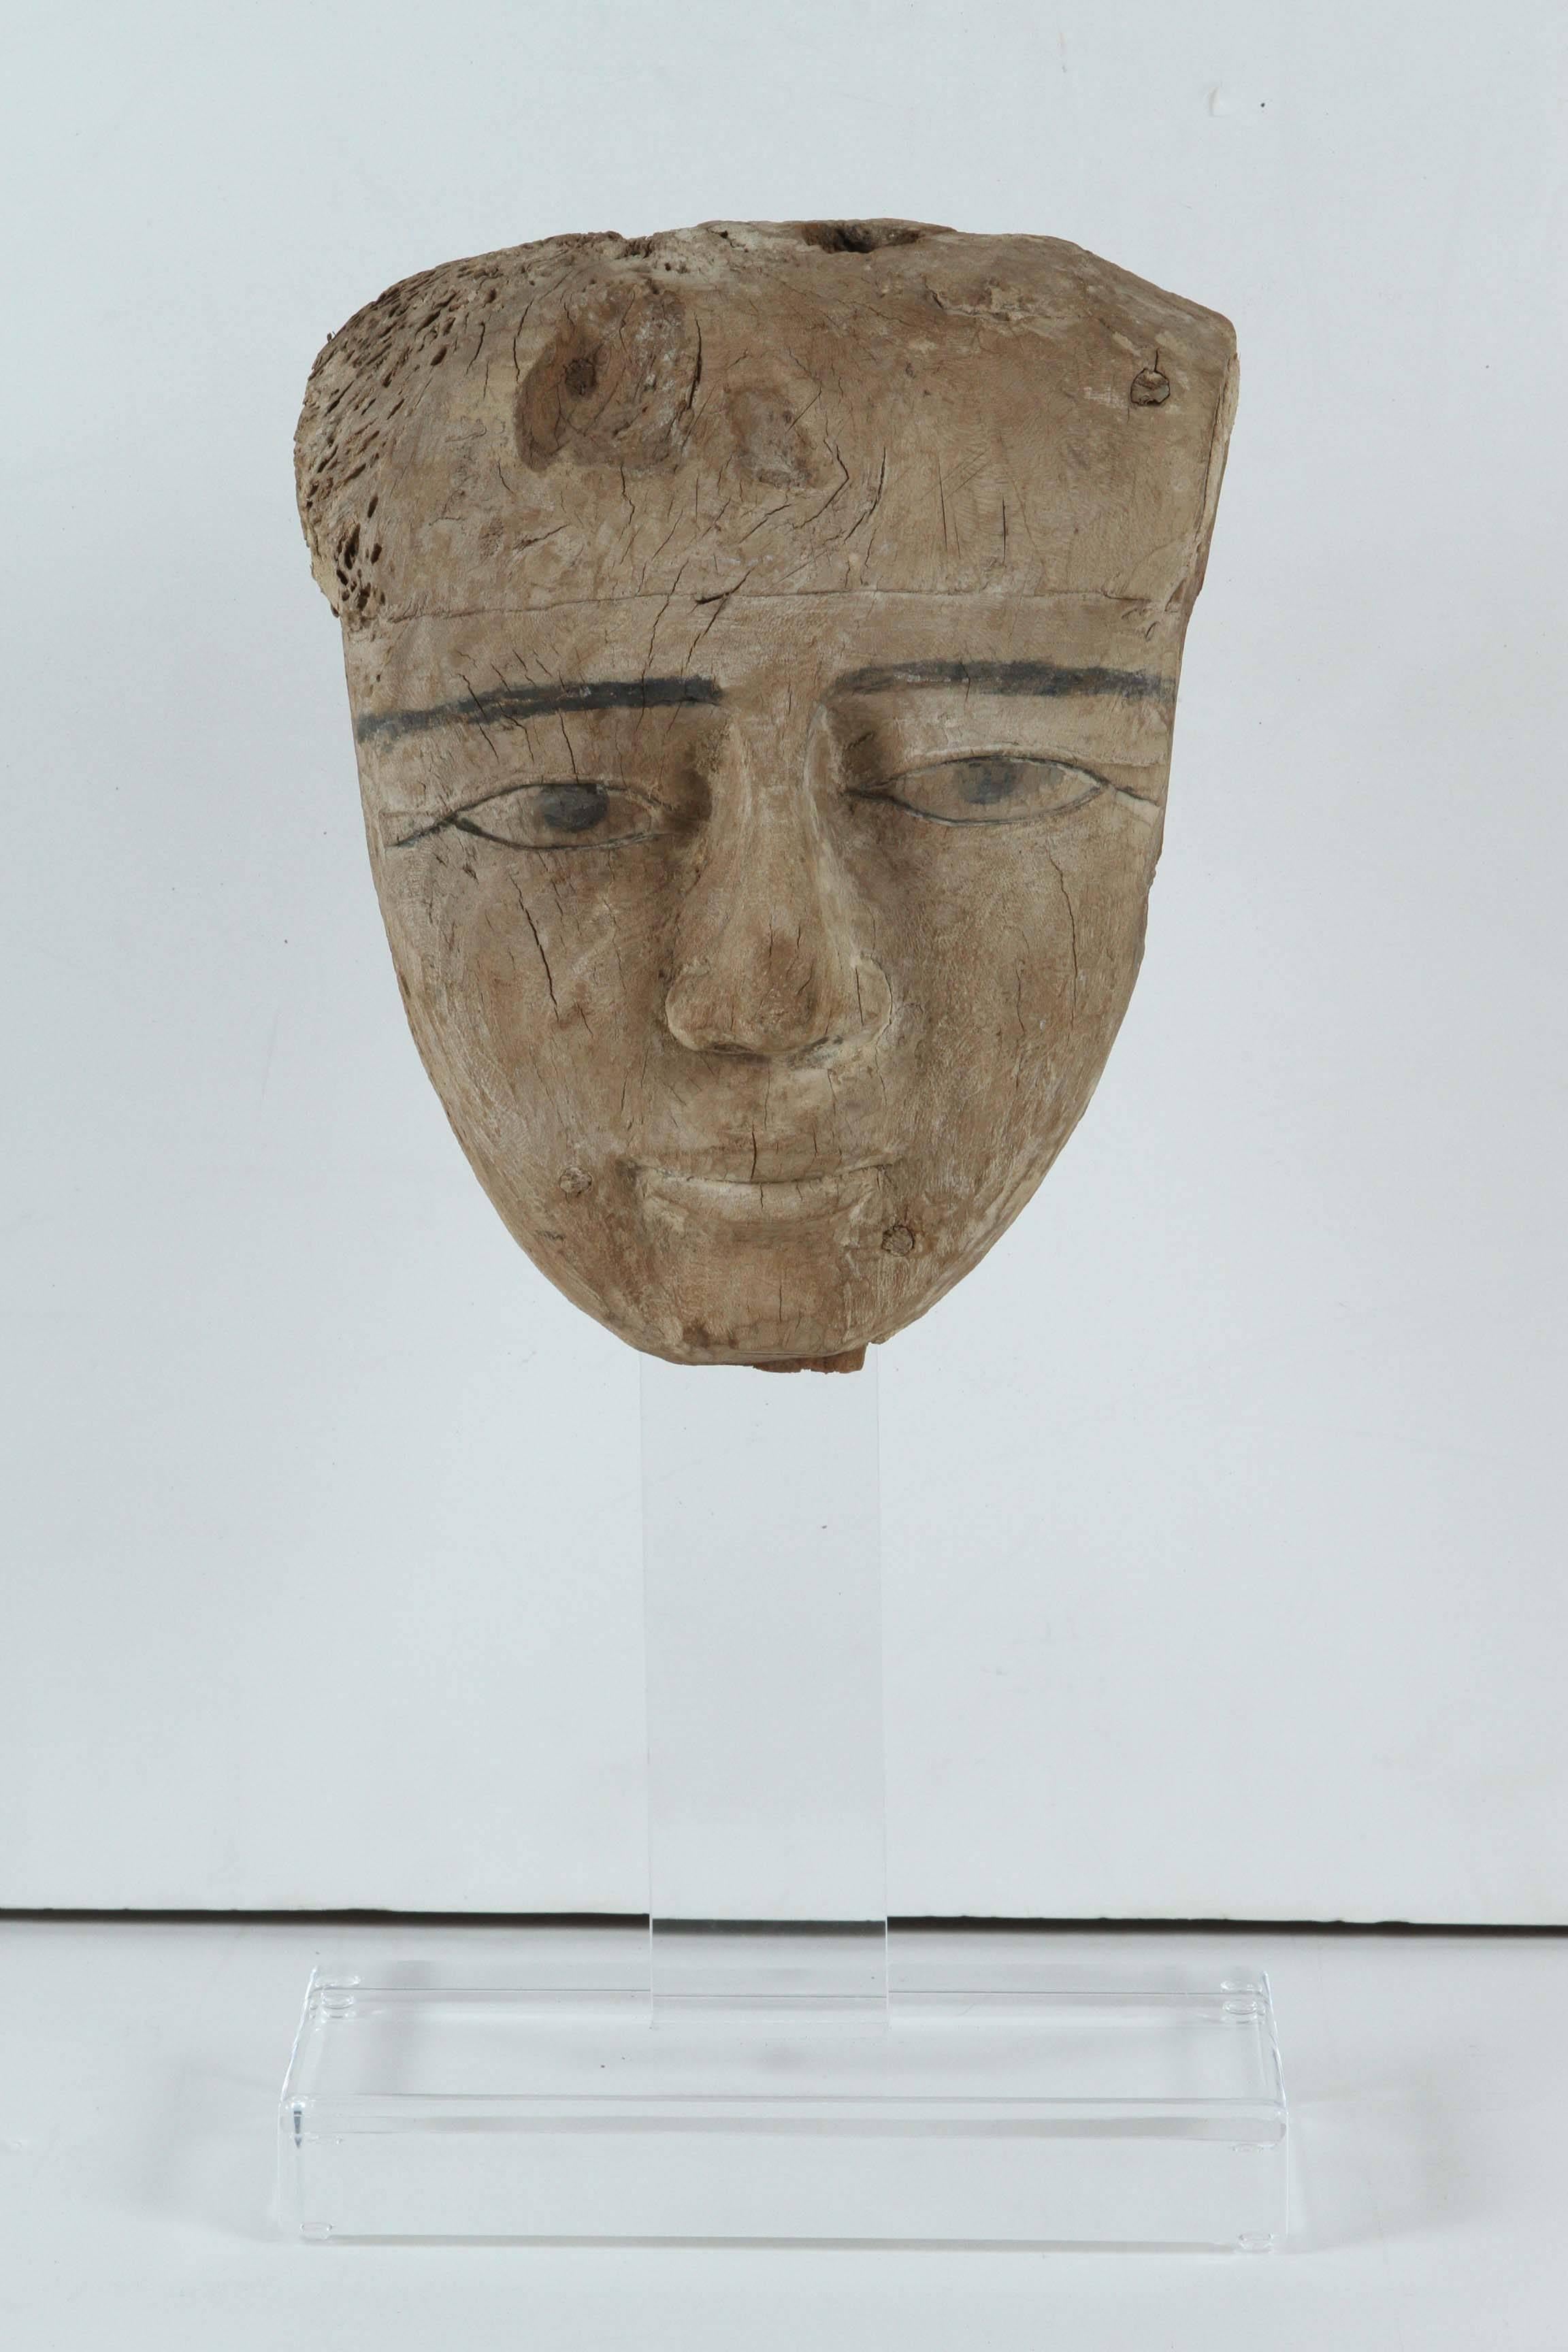 Large, carved cedar wood burial mask with paint traces on a custom, Lucite stand.